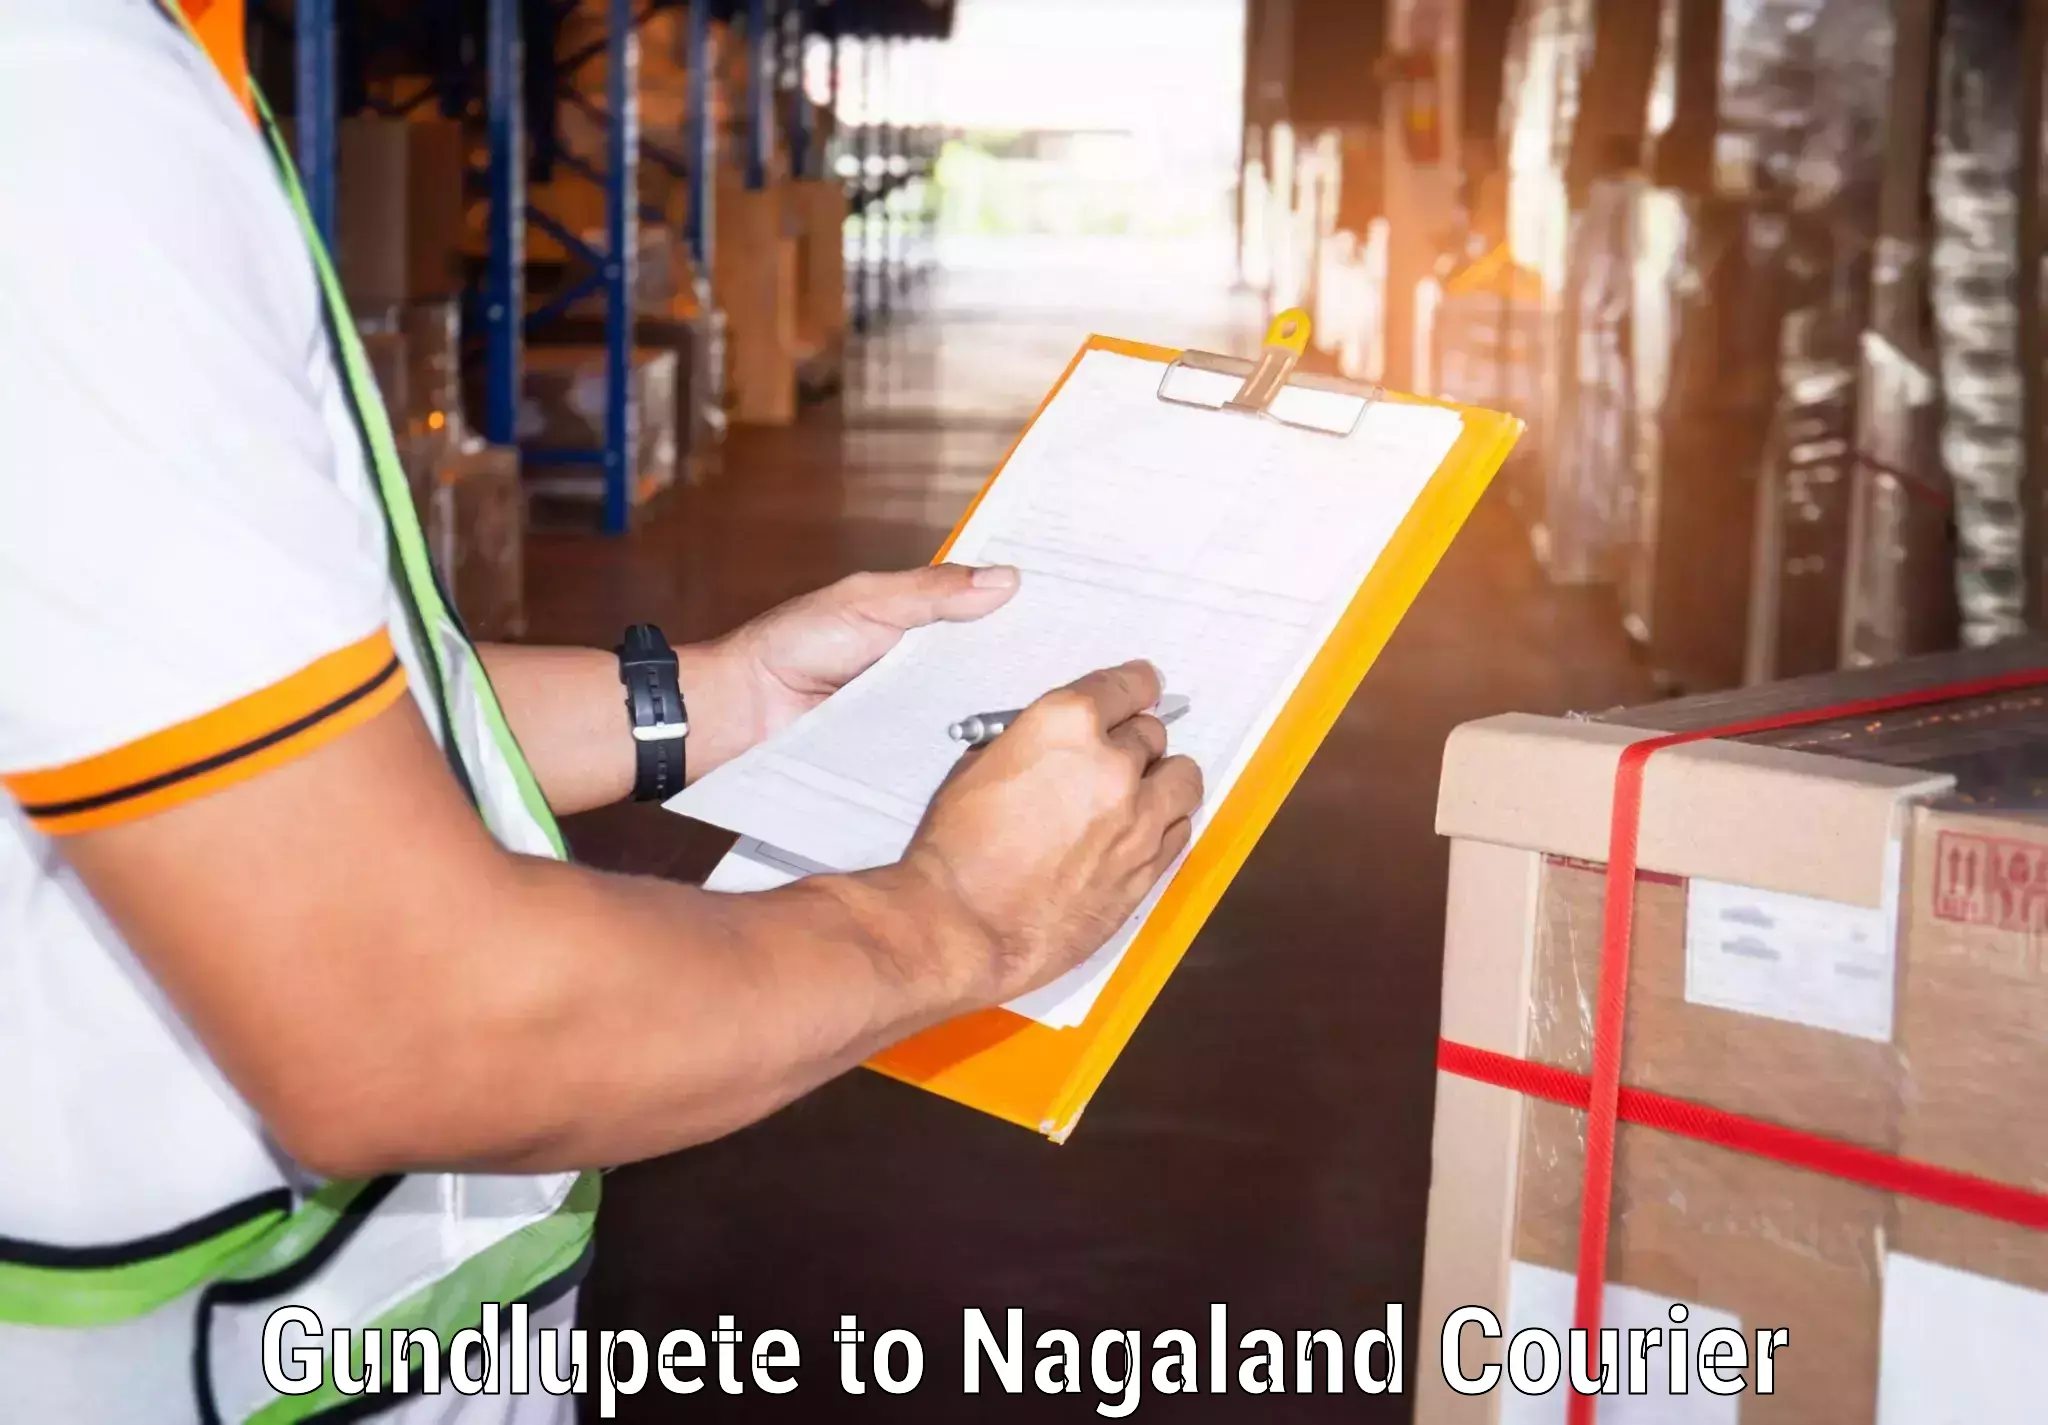 Global courier networks Gundlupete to Dimapur